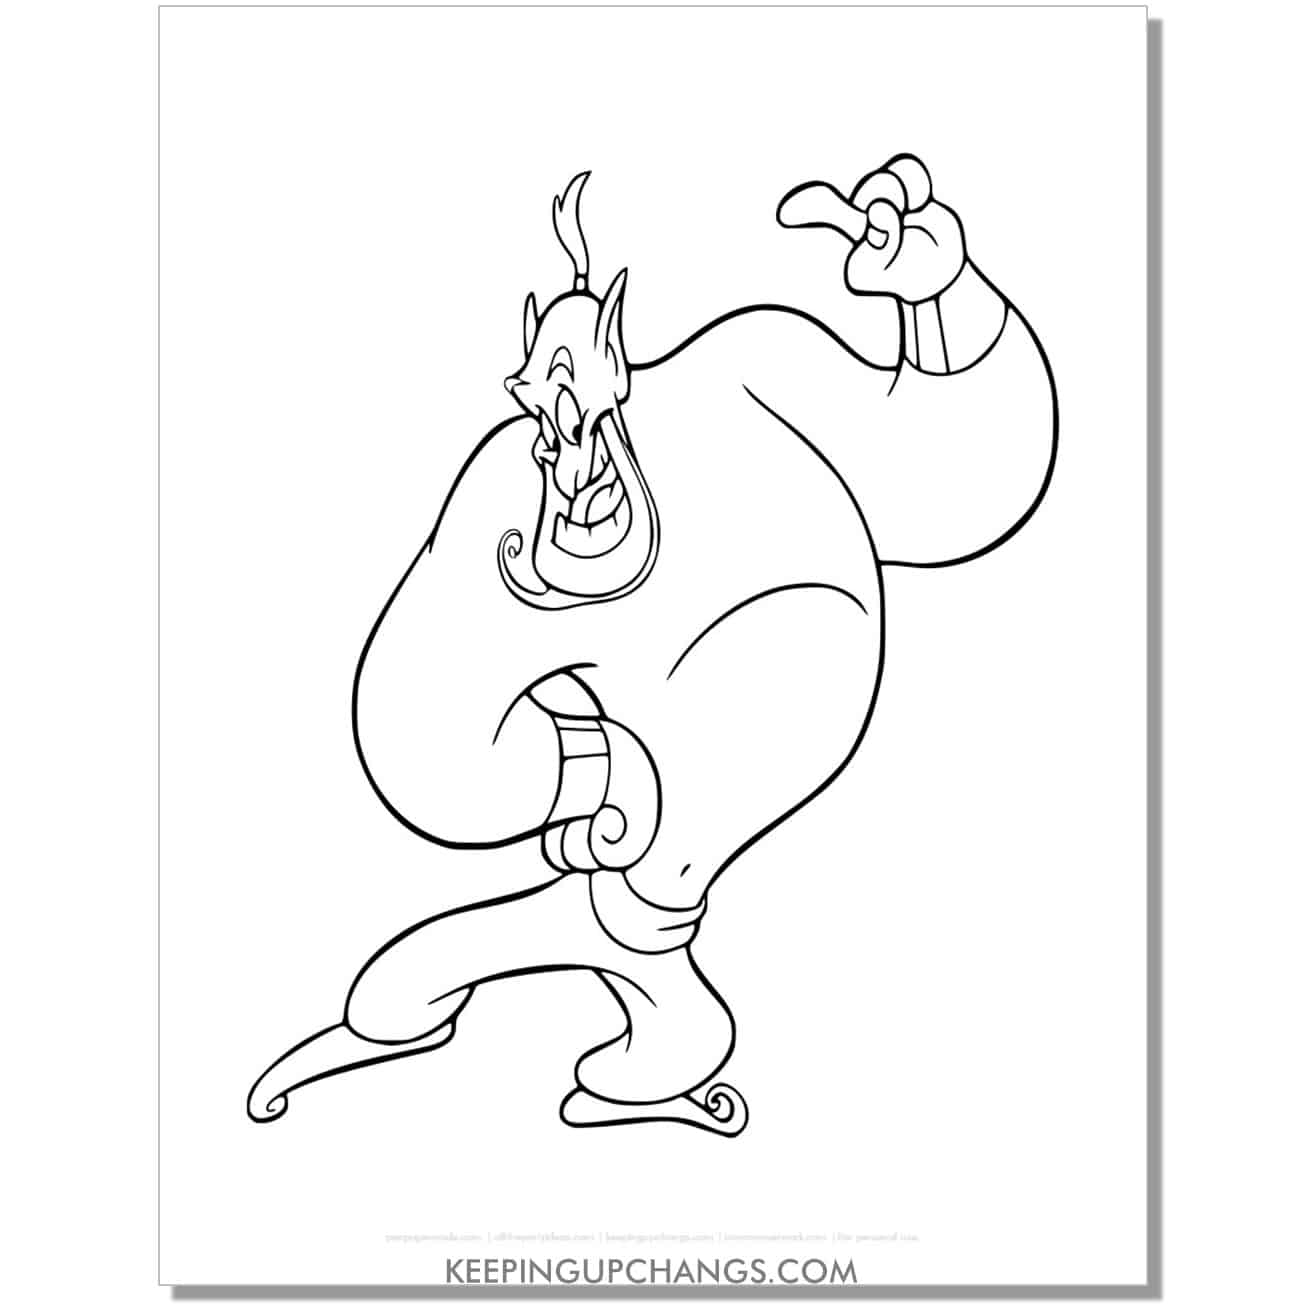 aladdin genie steps out with foot to side coloring page, sheet.